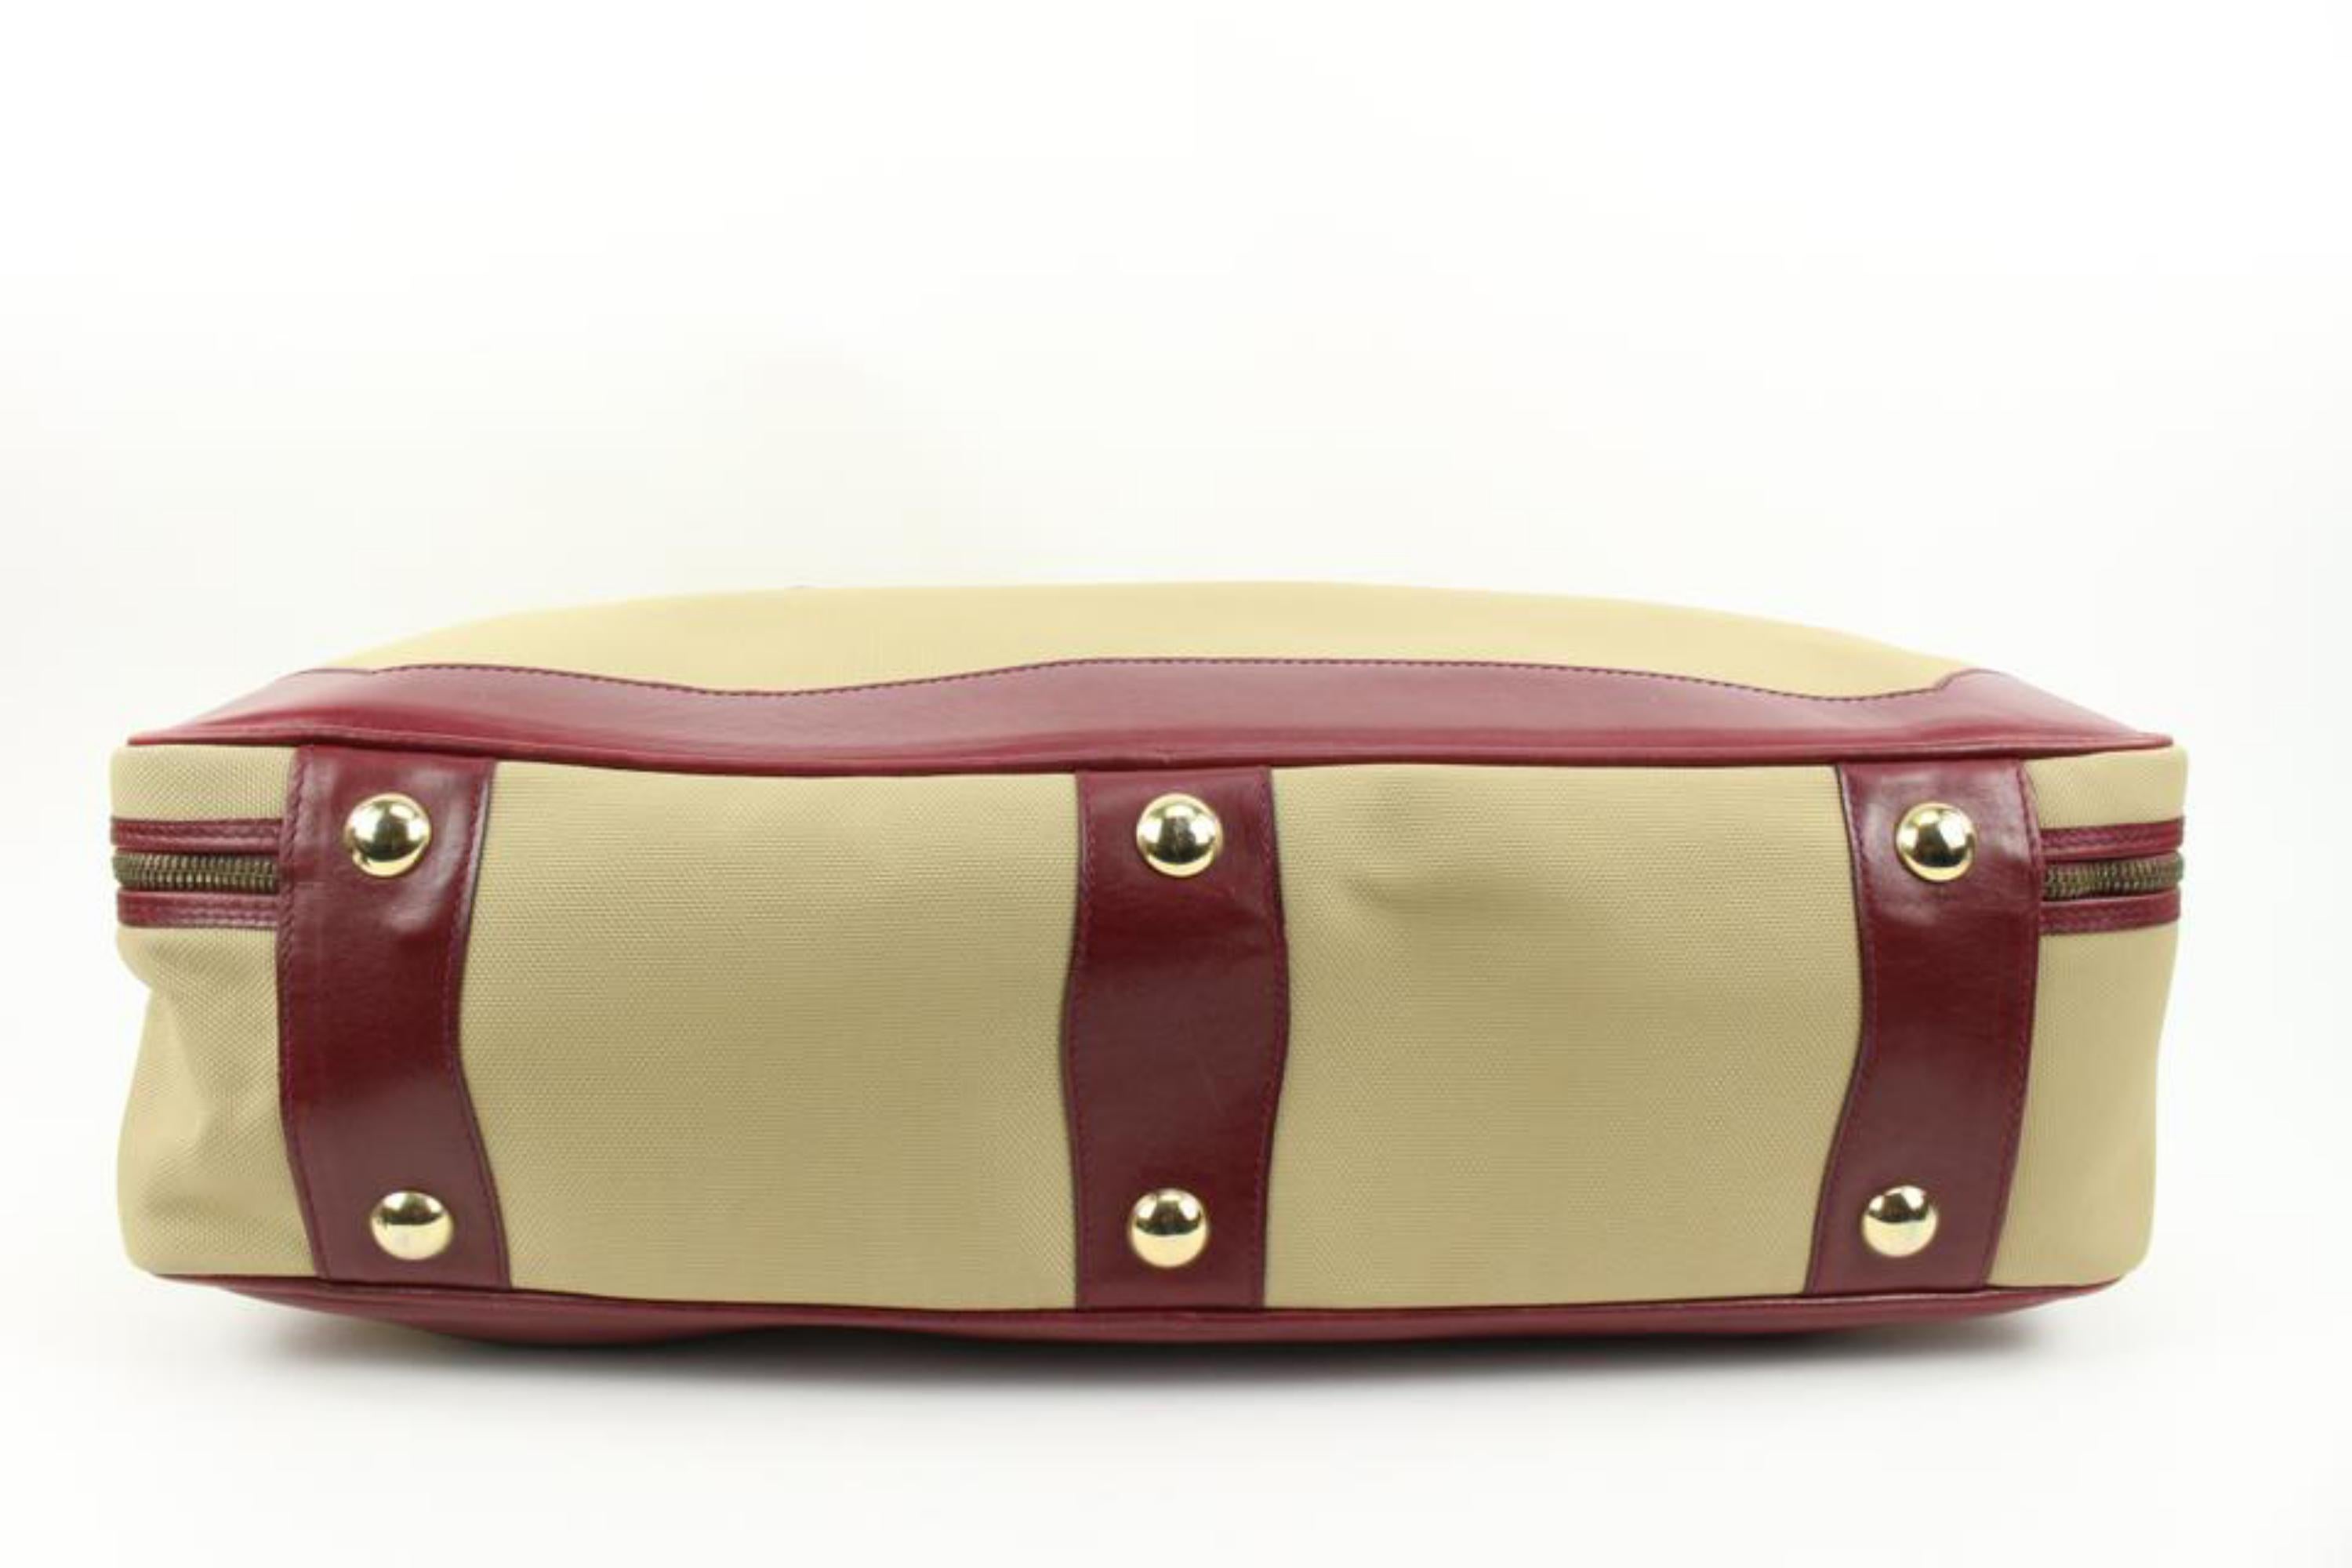 Gucci Large Beige x Burgundy Suitcase Luggage 63g218s For Sale 3